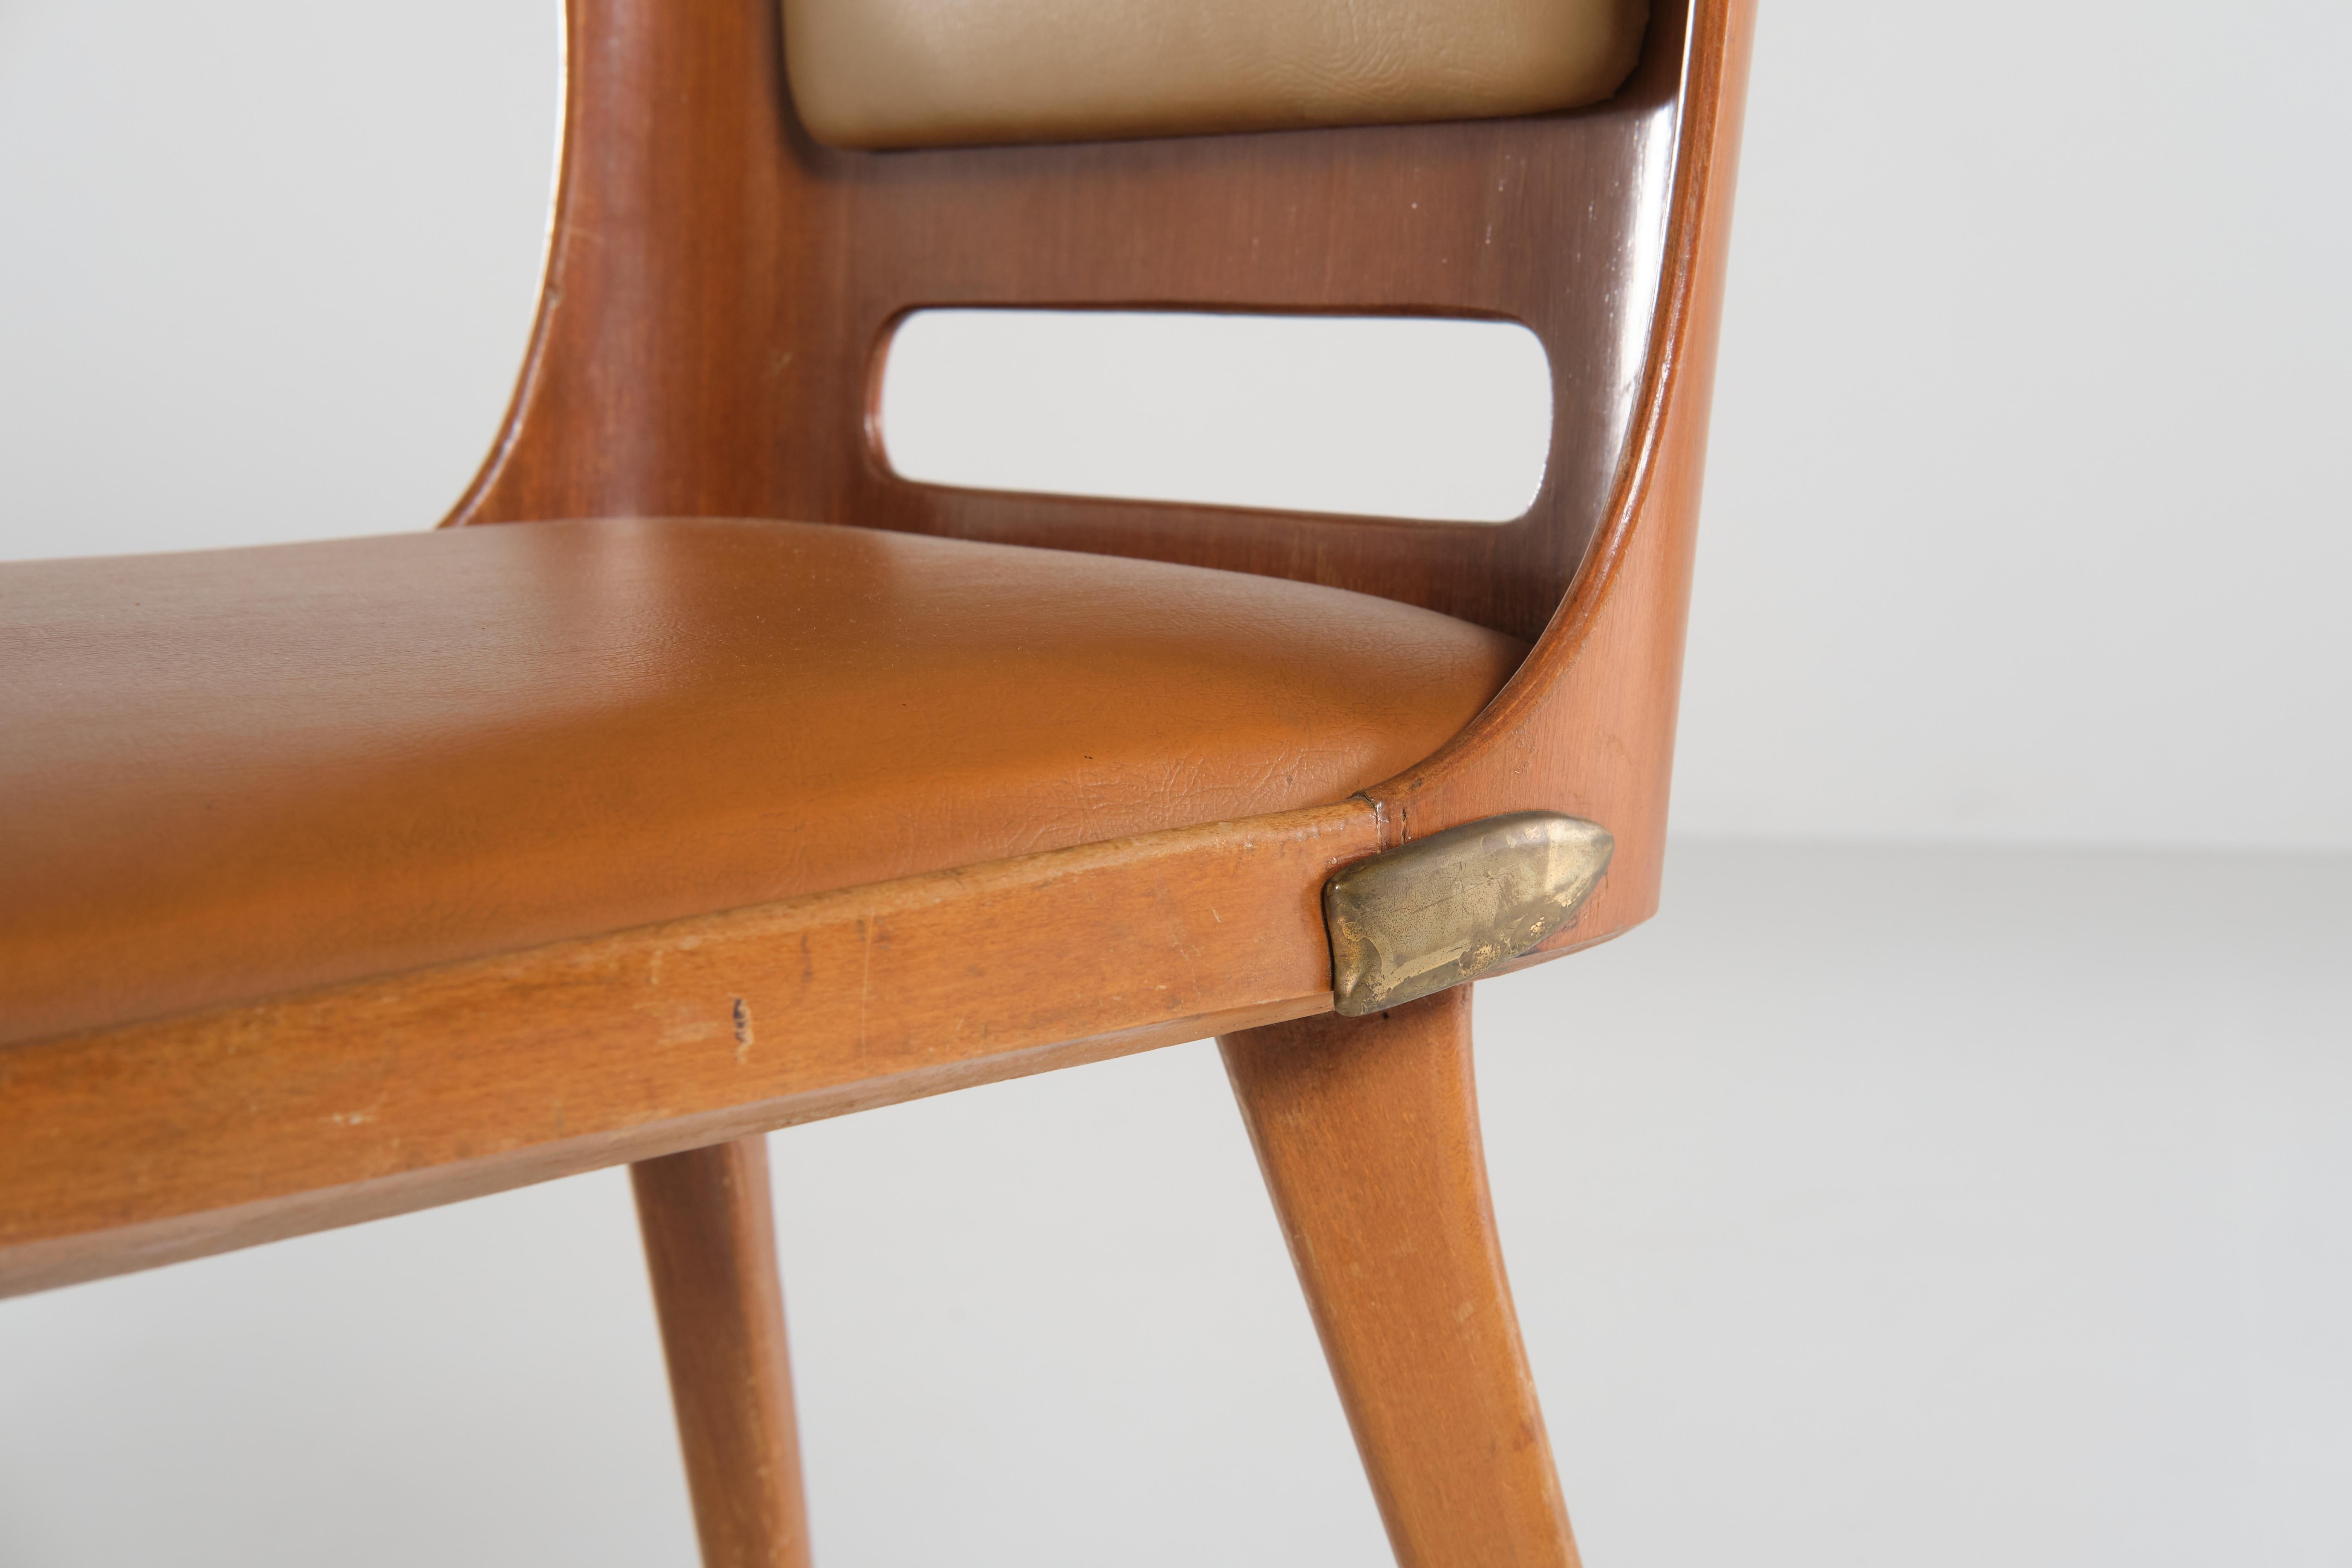 Mid-20th Century Carlo Ratti Set of 6 Chairs Wood Plywood and Faux Leather, Italian Design 1950s For Sale